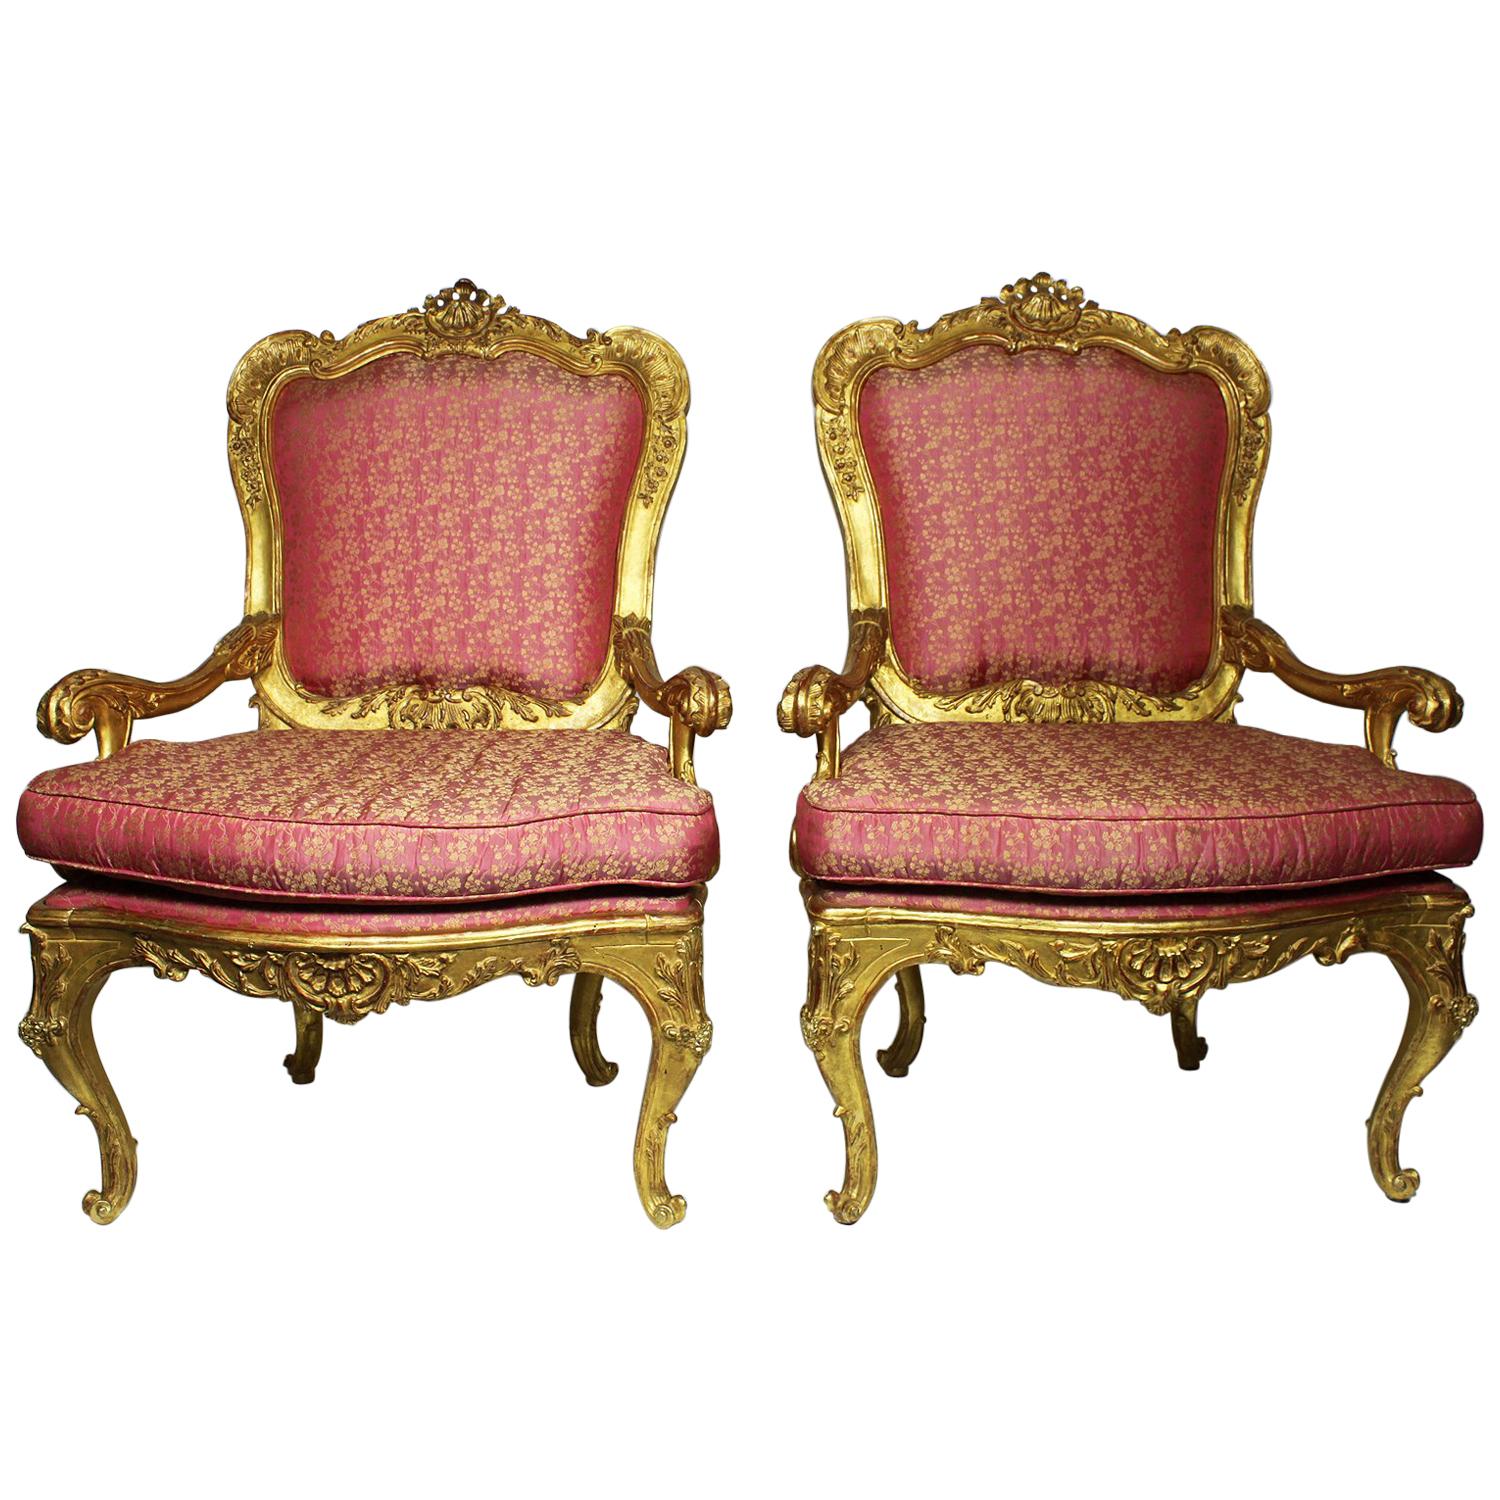 Pair of Italian Venetian Rococo Revival Style Giltwood Carved Throne Armchairs